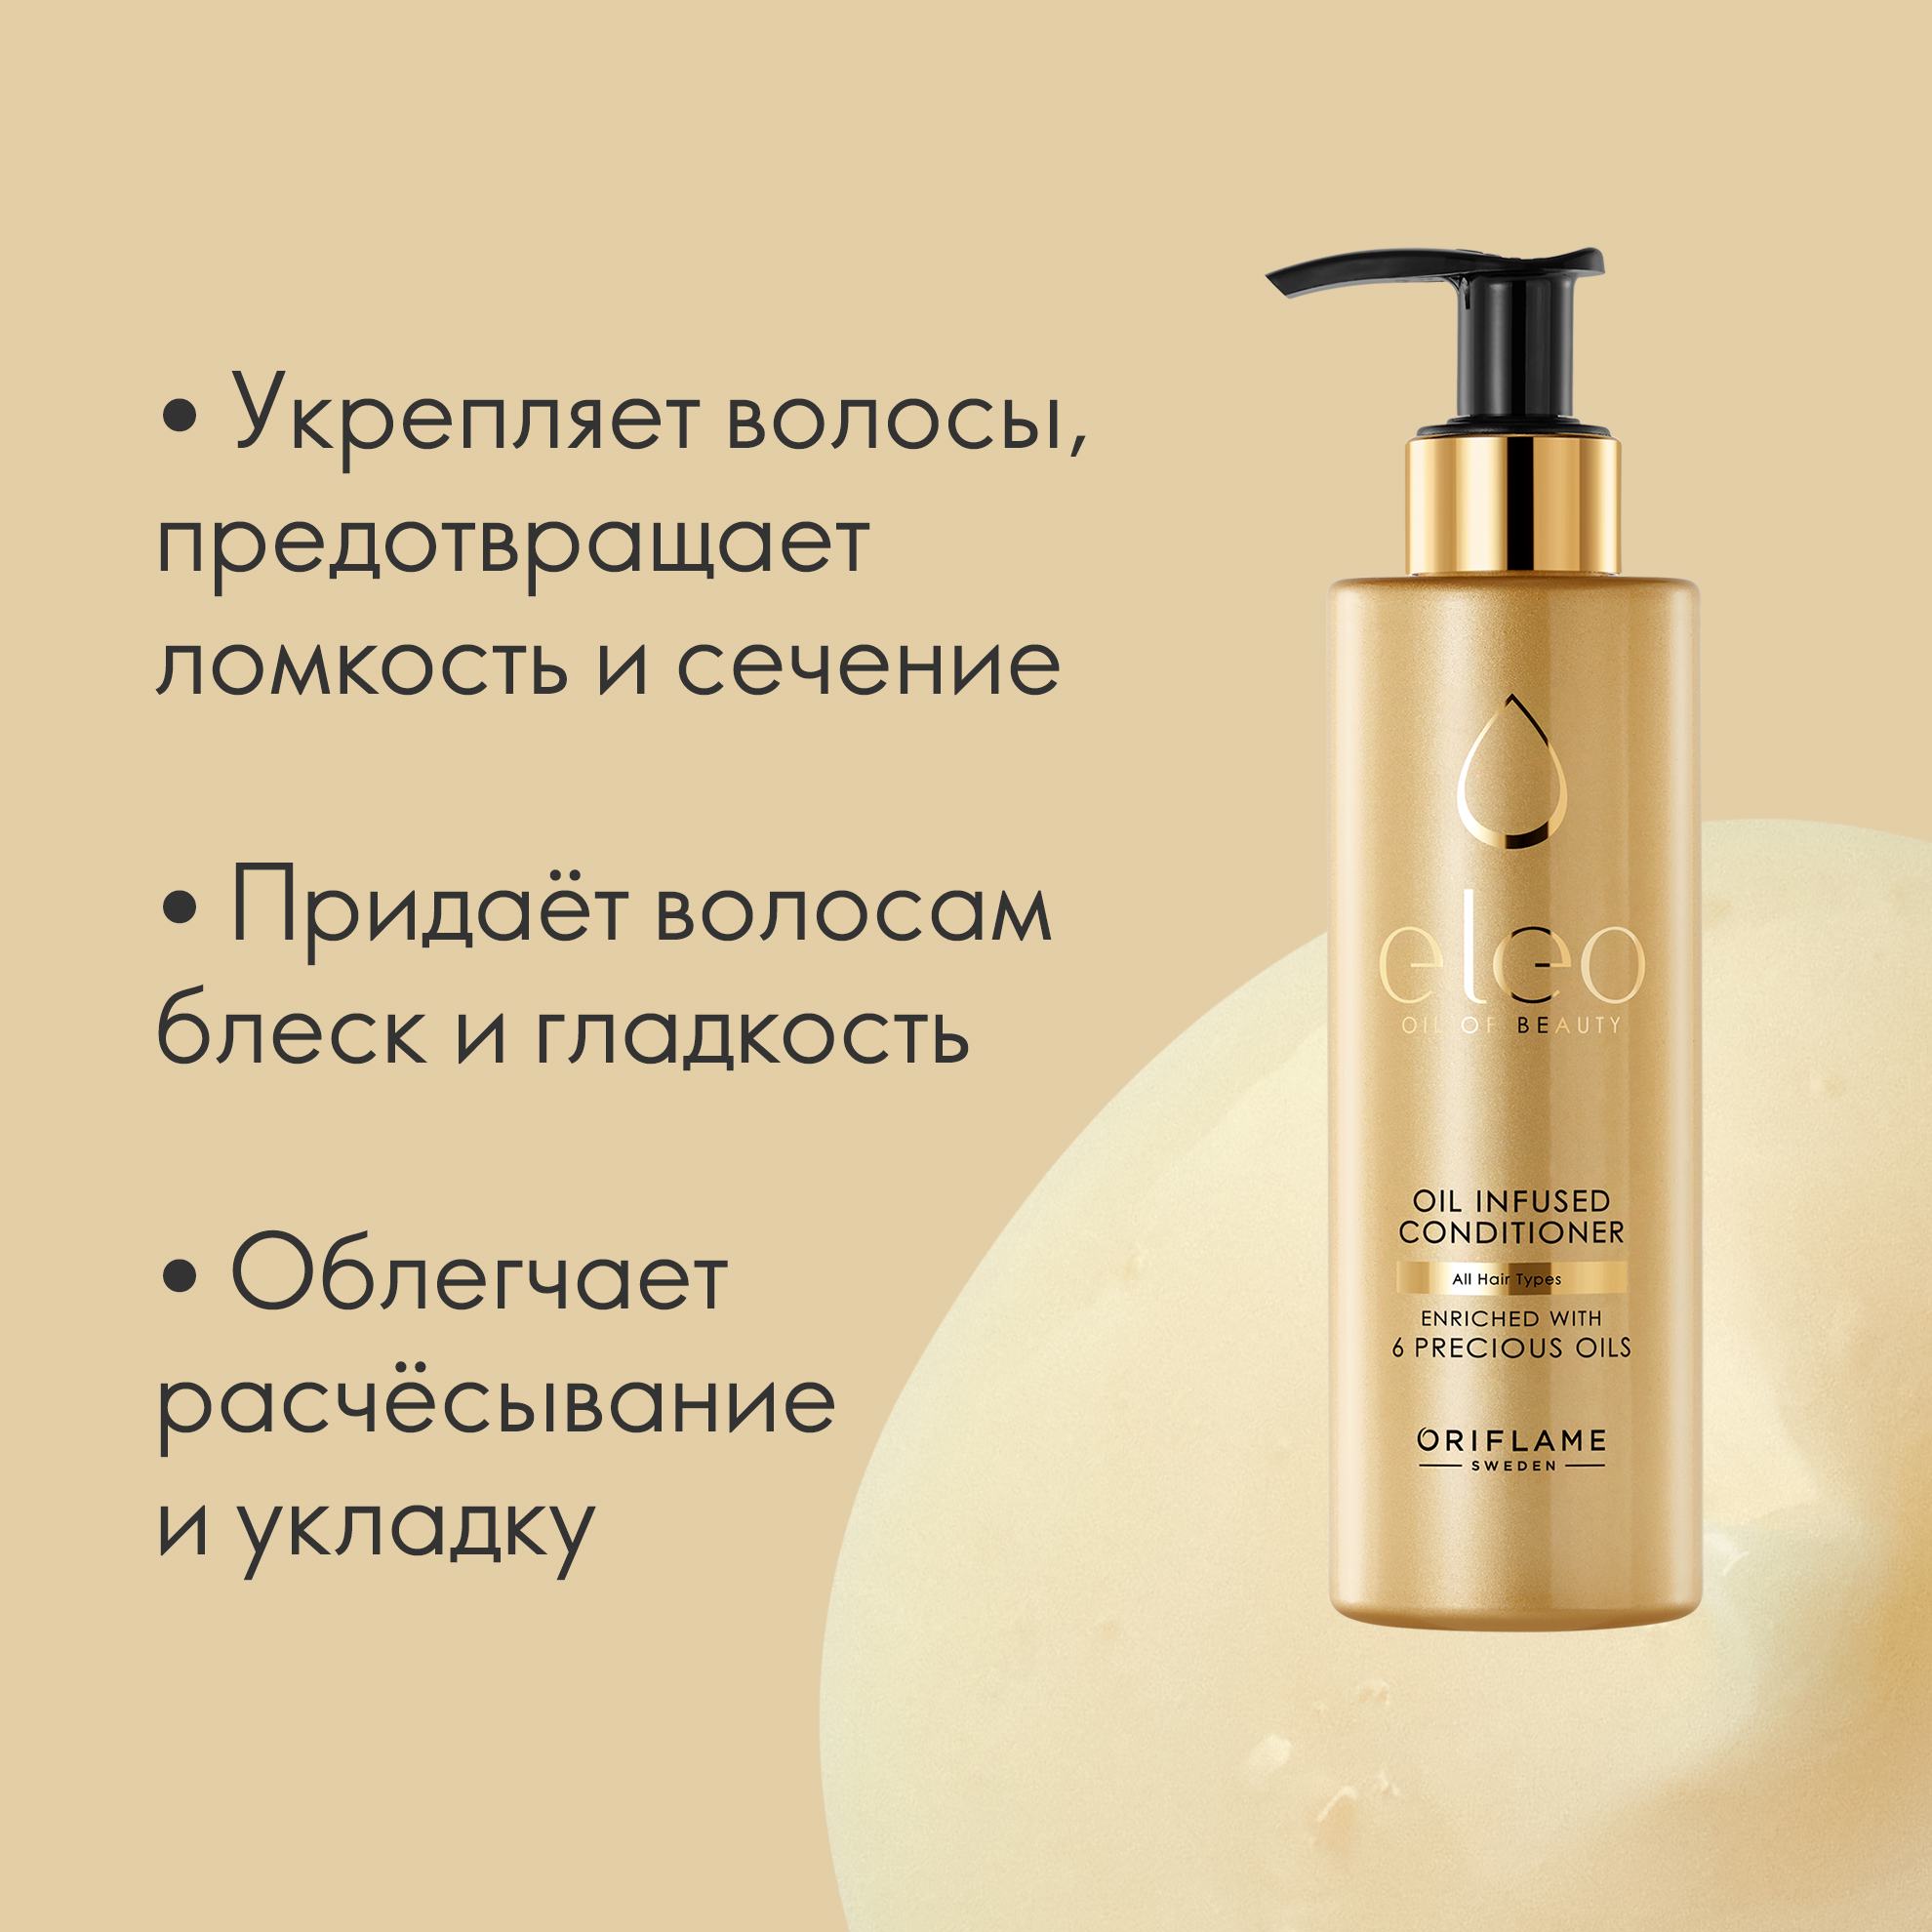 https://media-cdn.oriflame.com/productImage?externalMediaId=product-management-media%2fProducts%2f38597%2fBY%2f38597_3.png&id=15404434&version=1